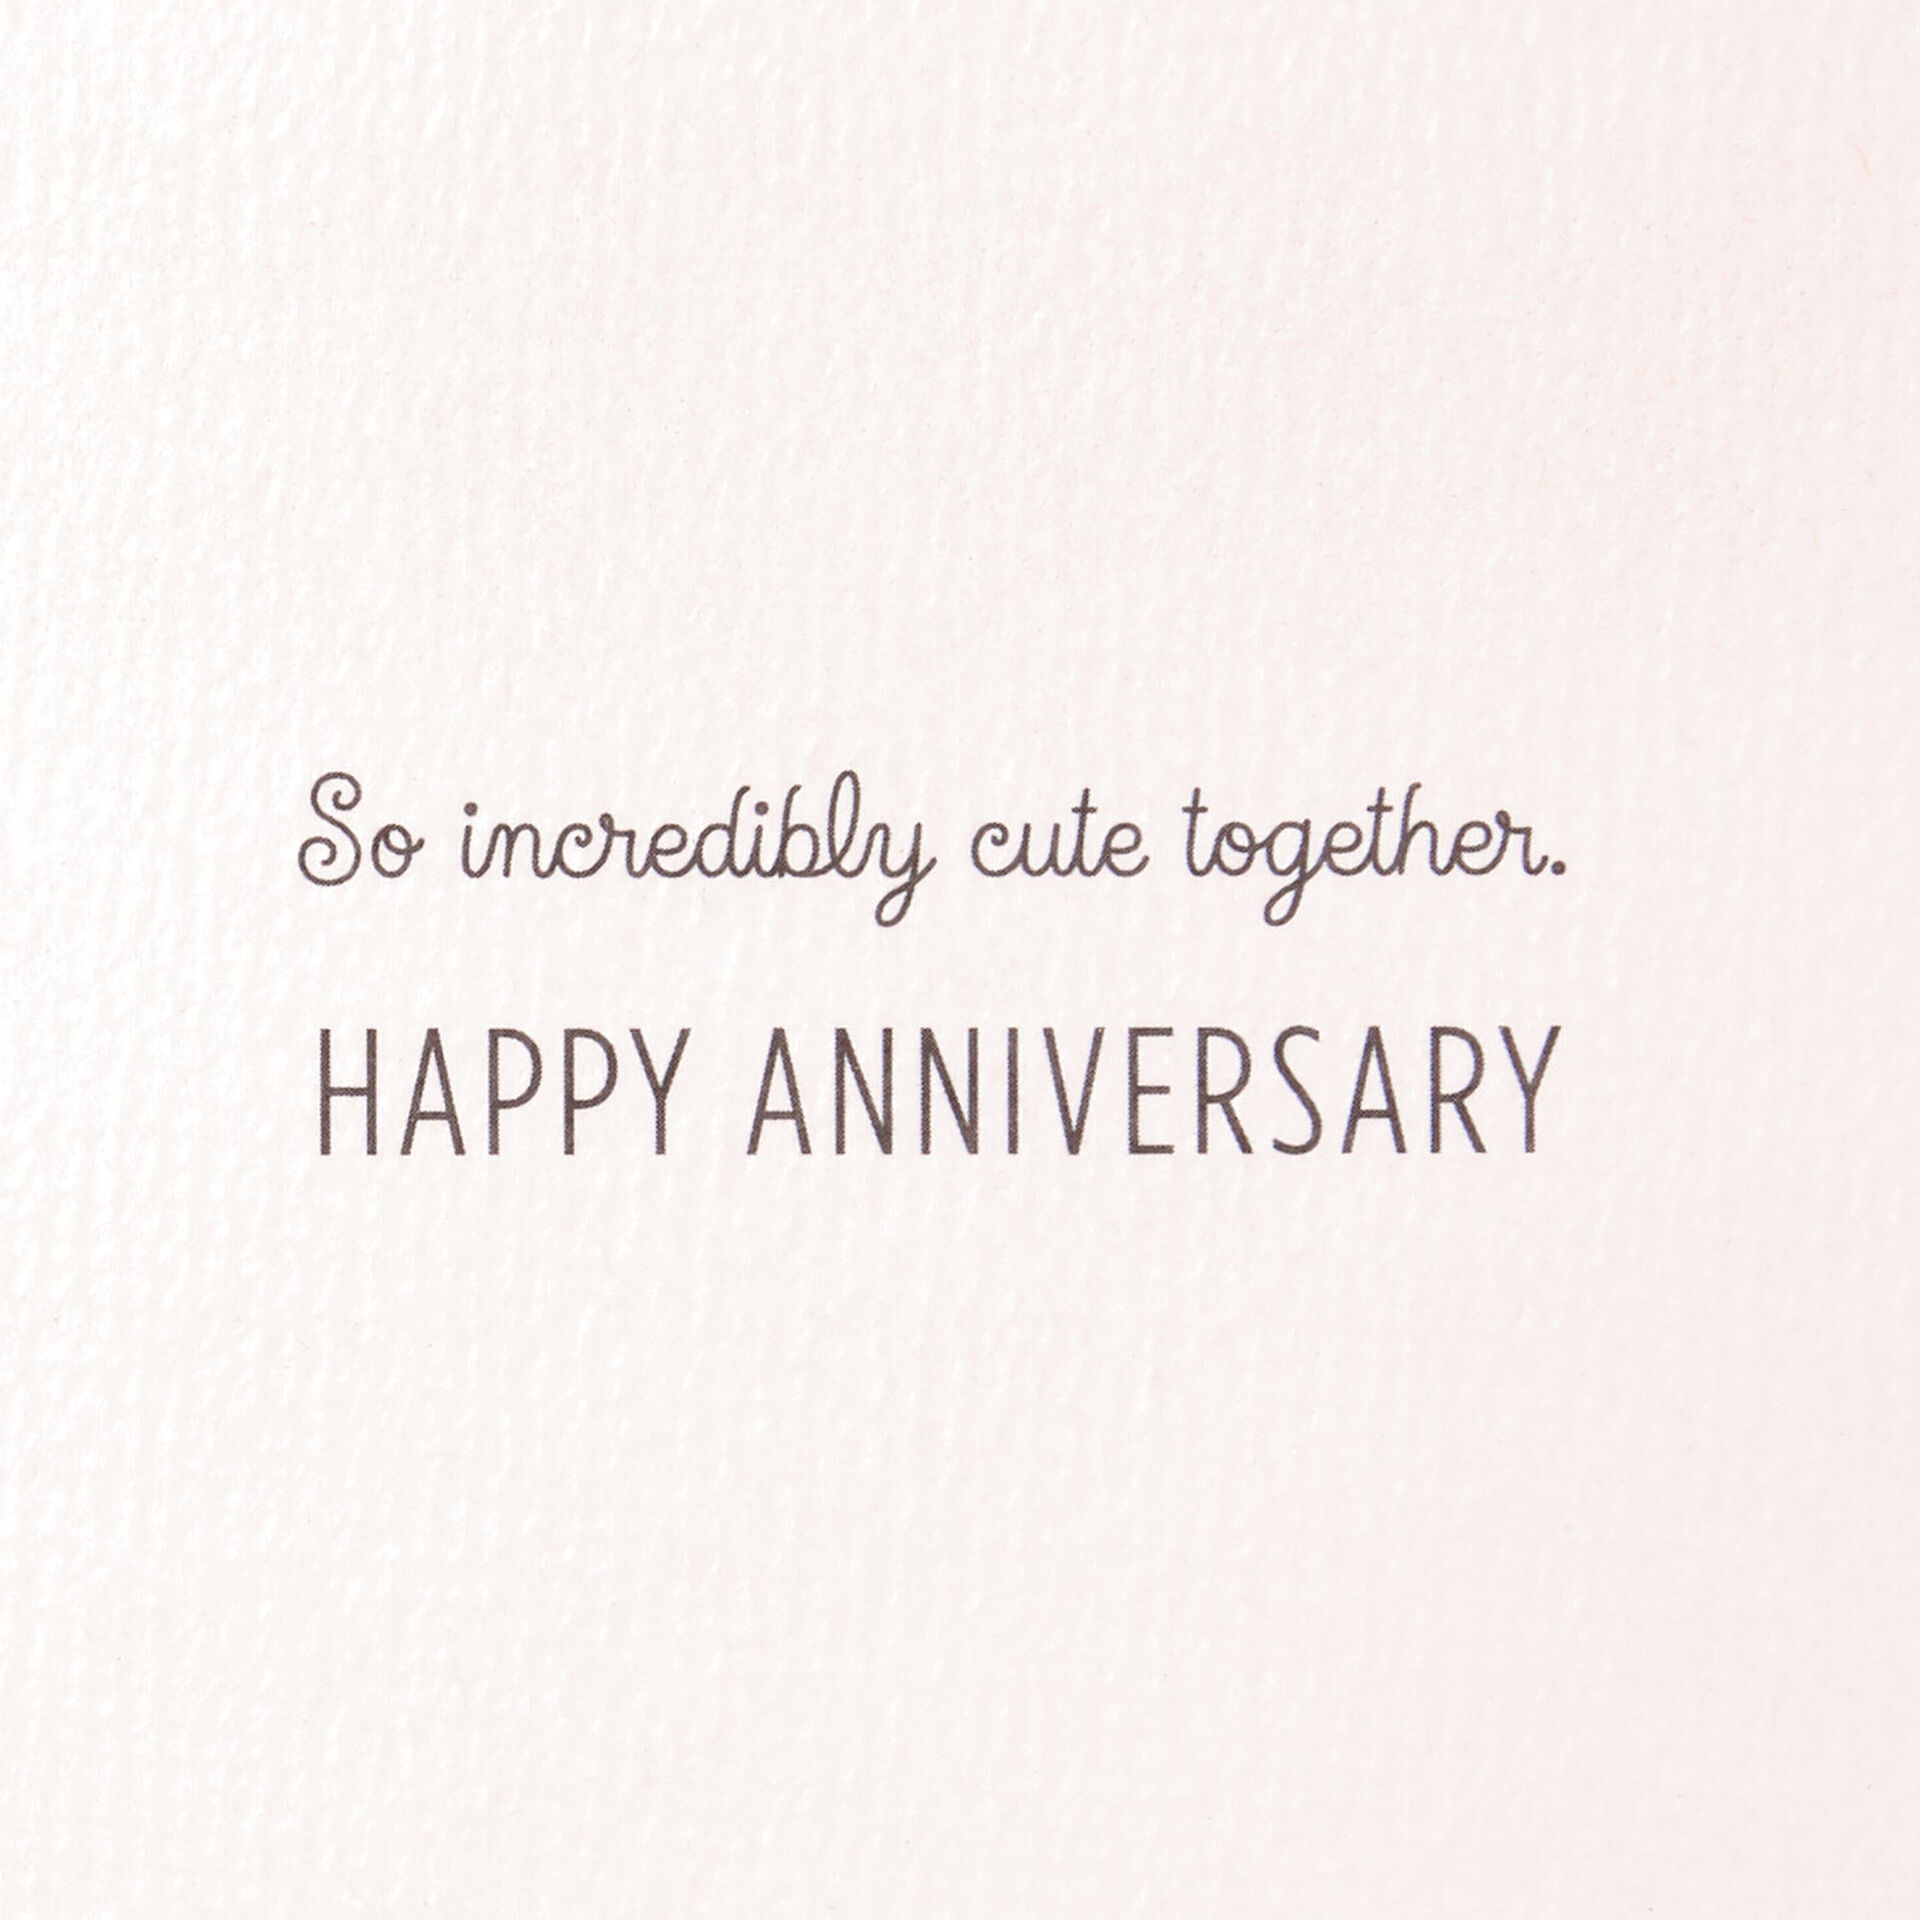 Mickey-and-Minnie-Holding-a-Heart-Anniversary-Card_799LAD9379_02